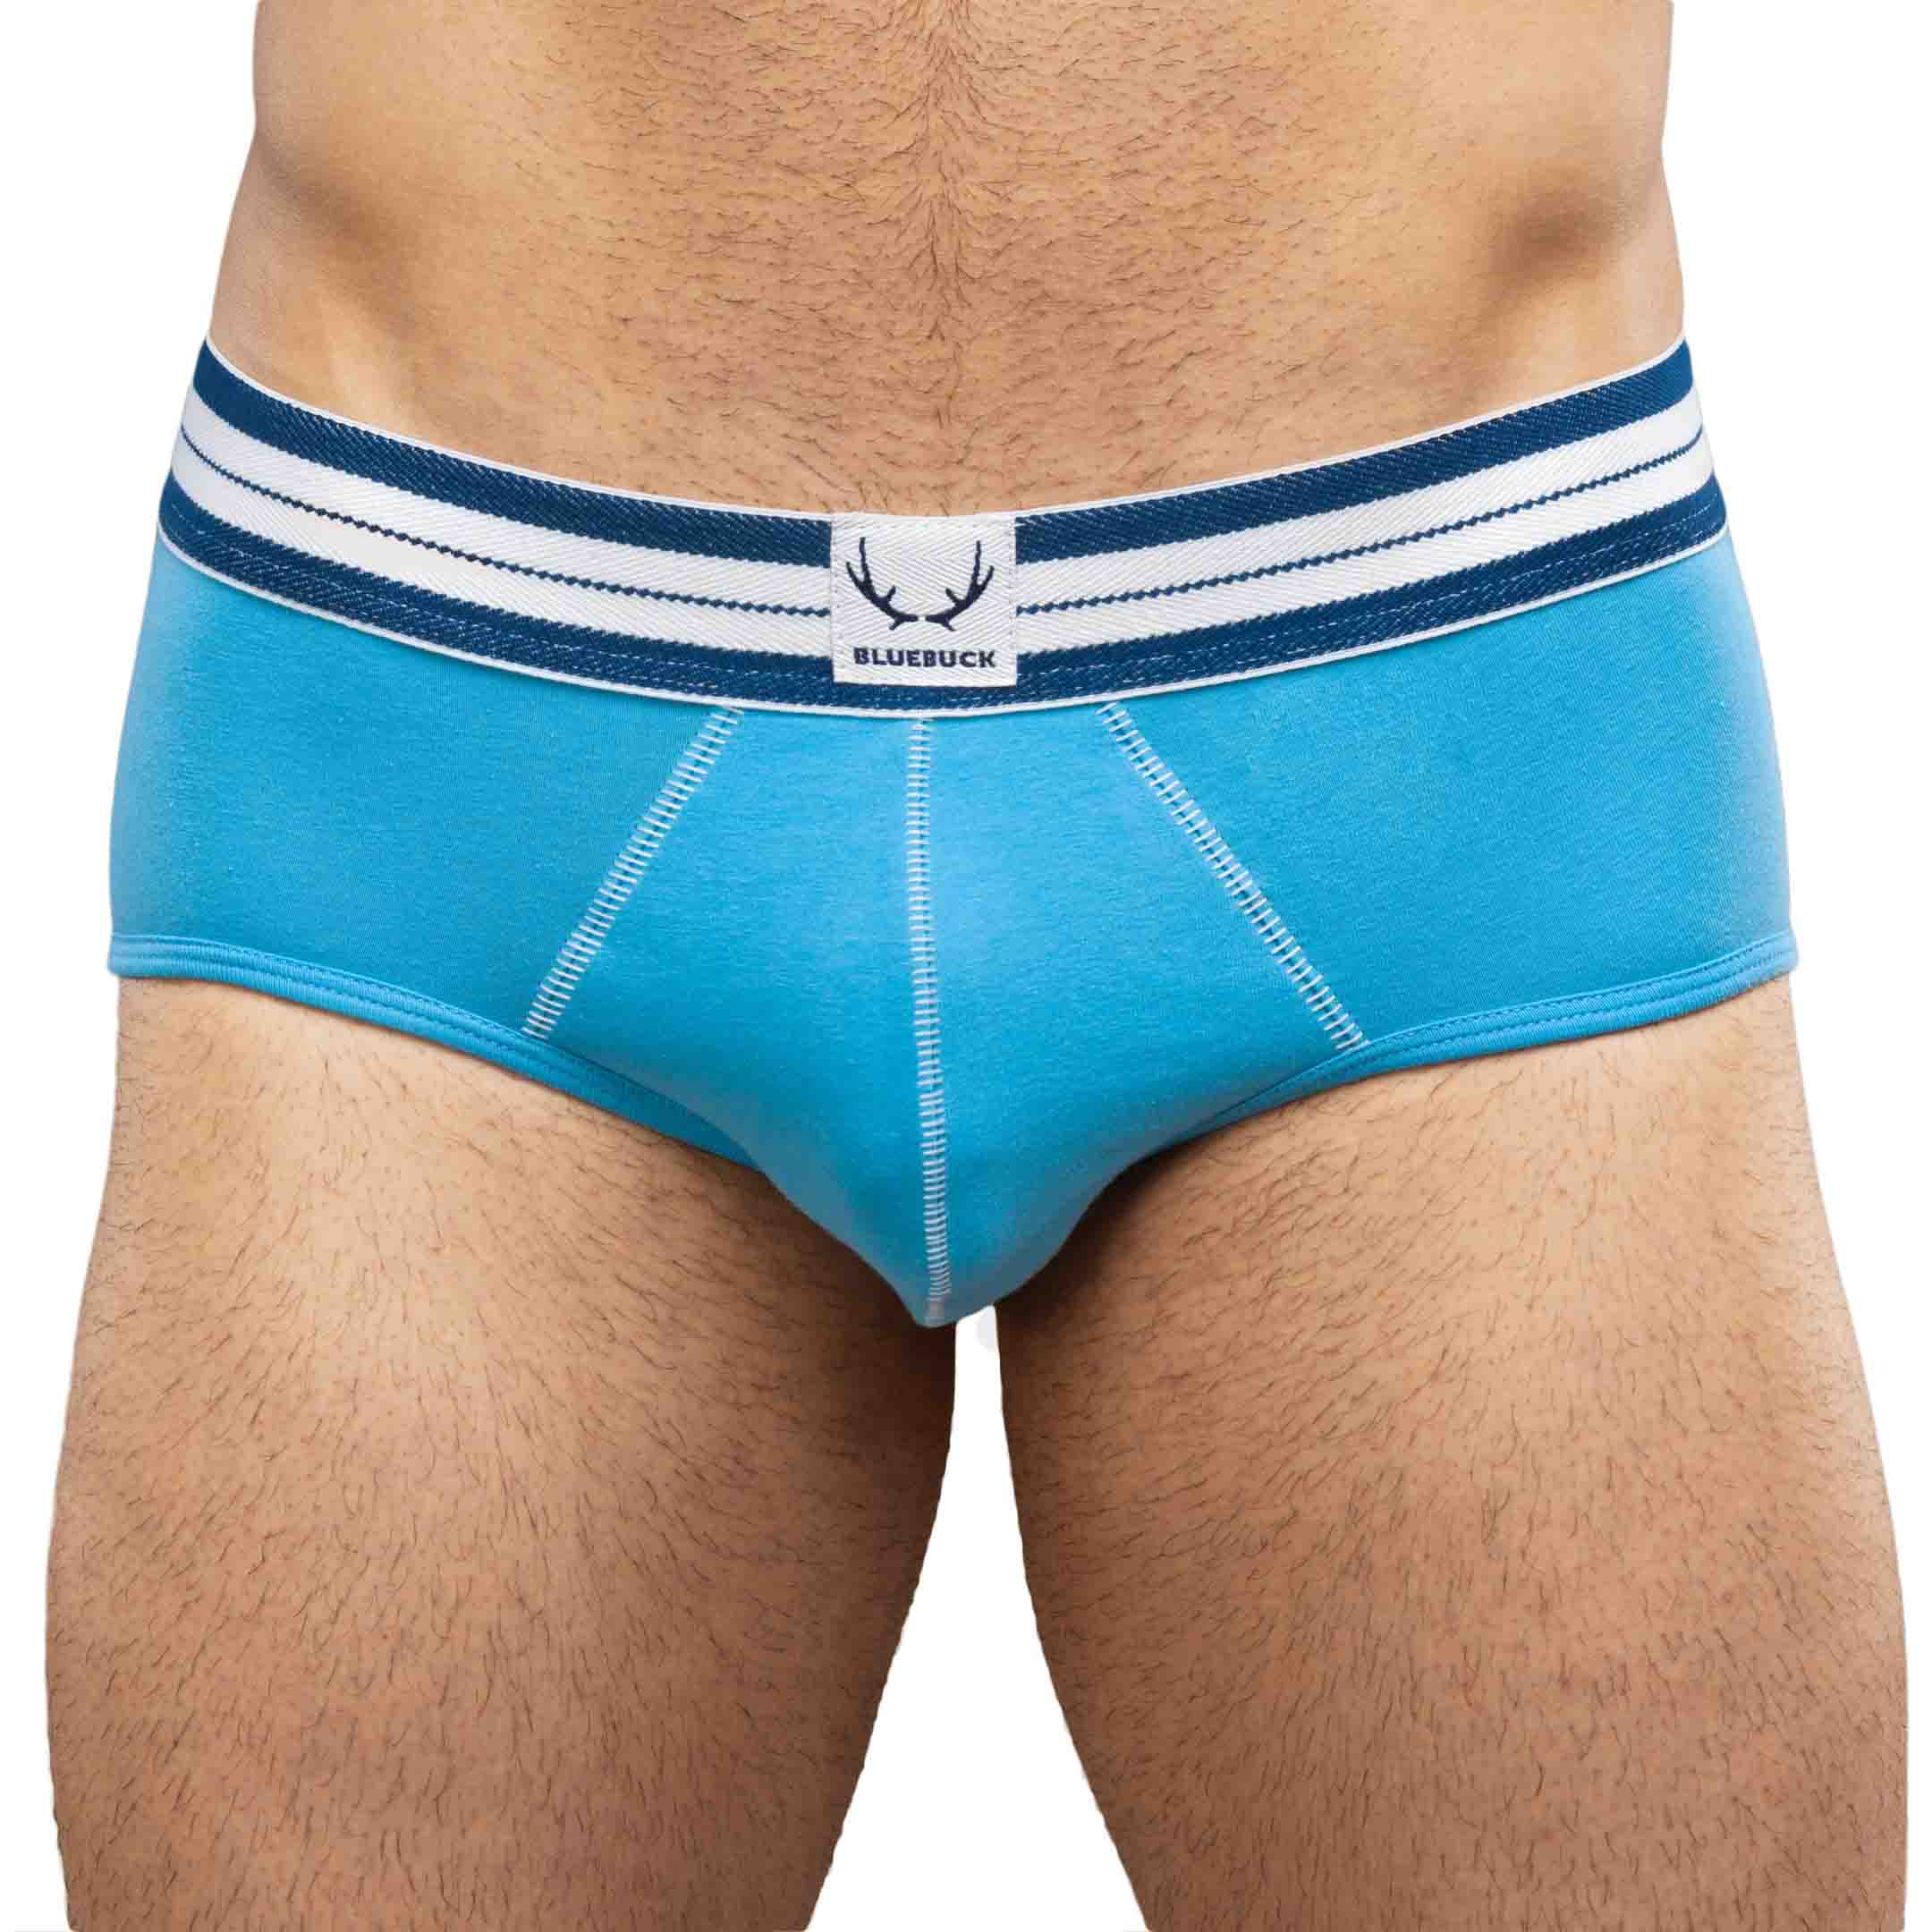 Light blue underpants made of organic cotton from Bluebuck